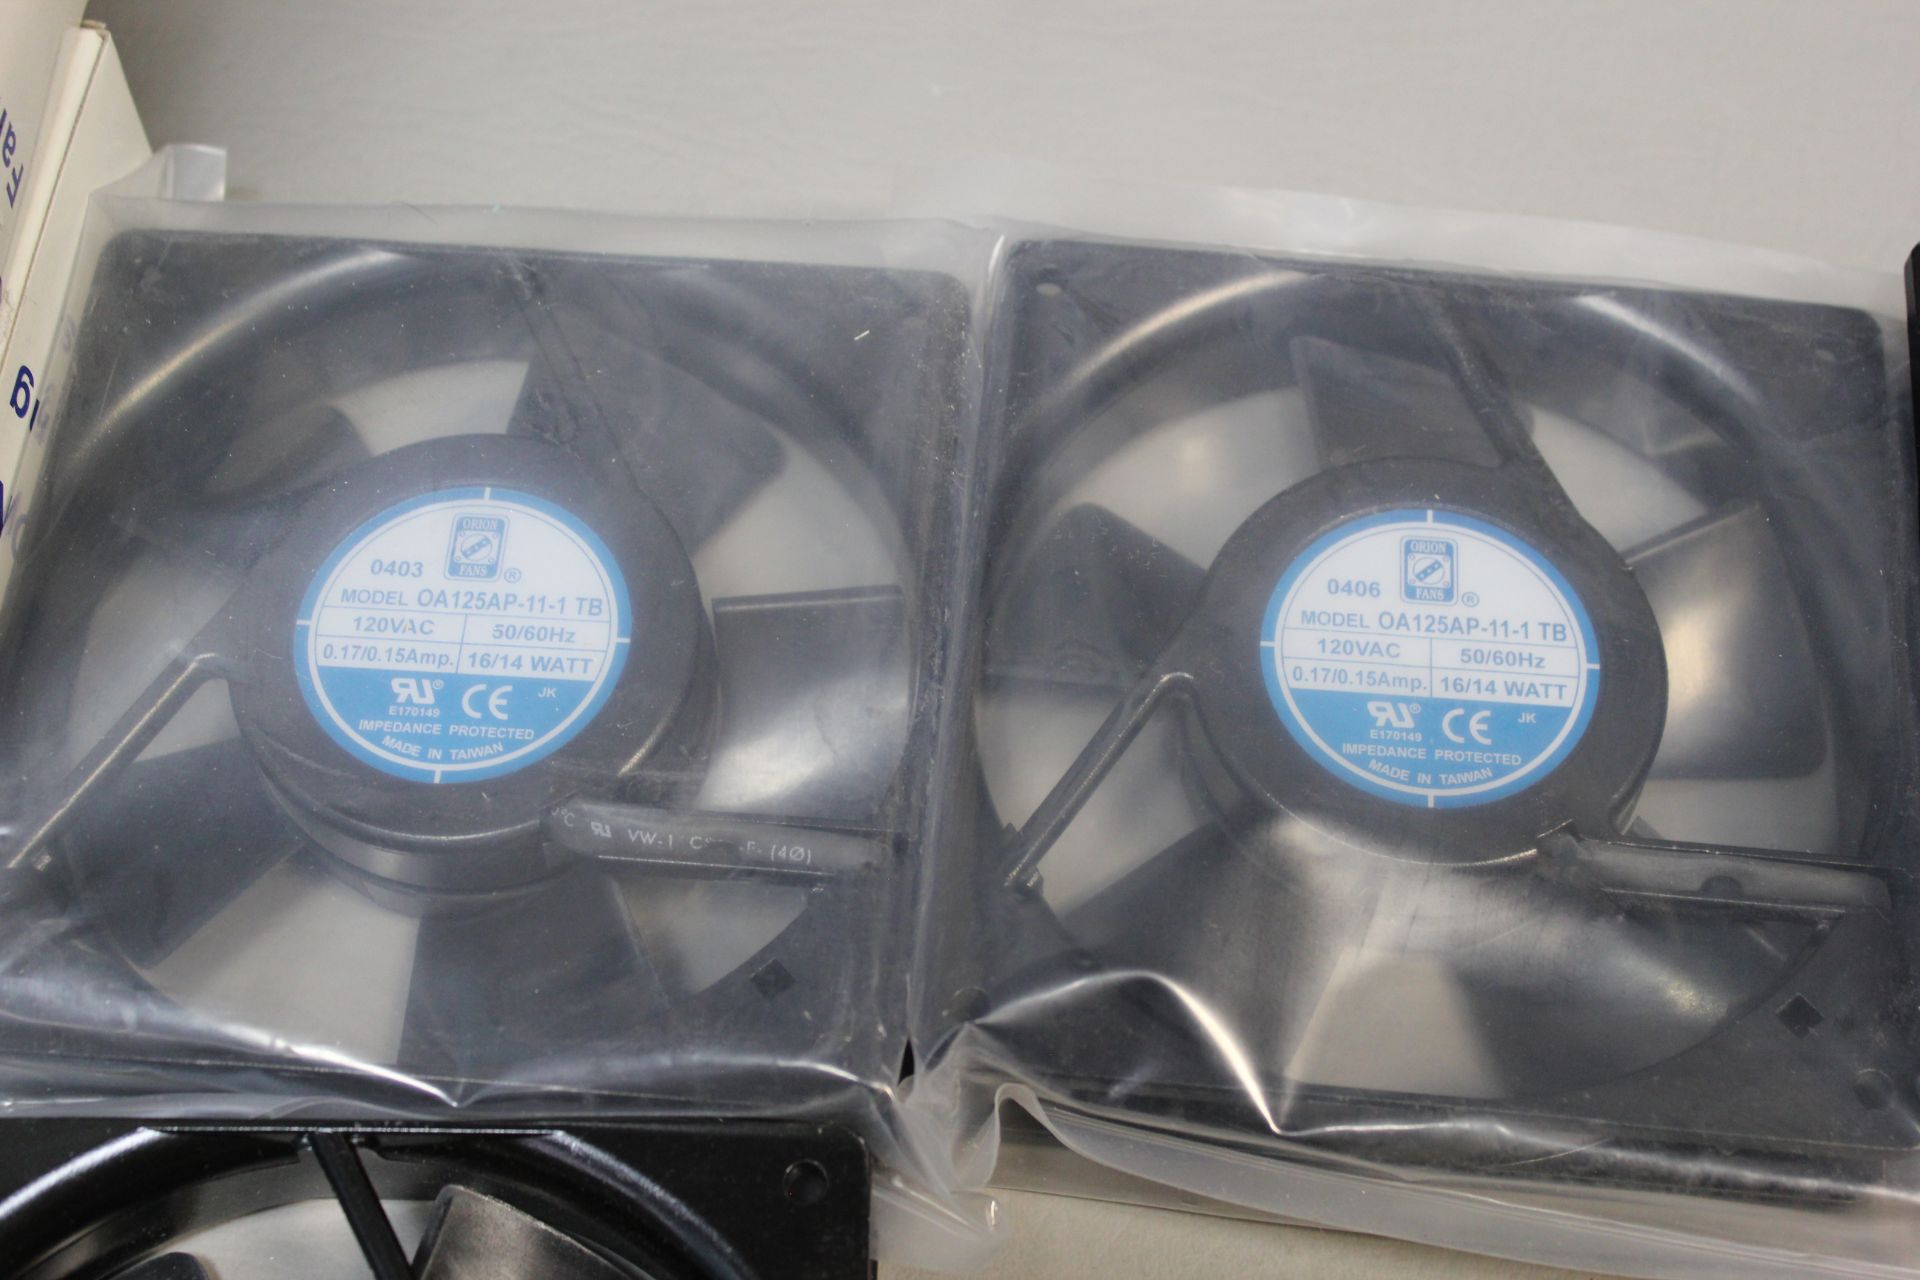 LOT OF NEW & UNUSED SANYO DENKI/ORION FANS & PARTS - Image 4 of 11